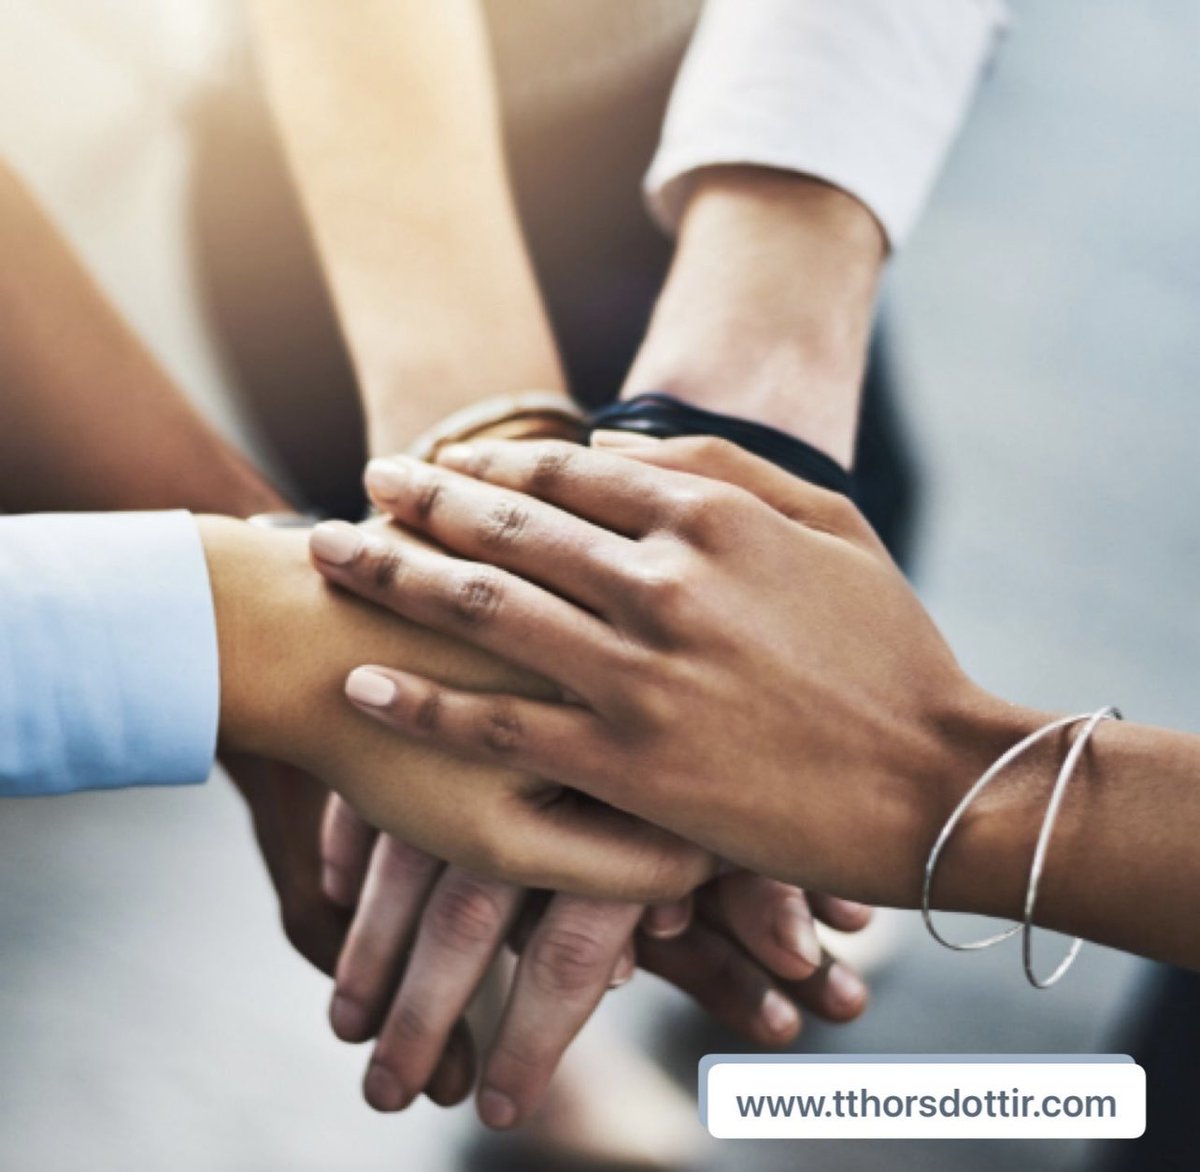 Unleash the potential of your teams post - merger. Our support services are designed to facilitate collaboration, innovation and help harmonise a blend of diverse talents. 

#mergers #acquisitions #teameffectiveness